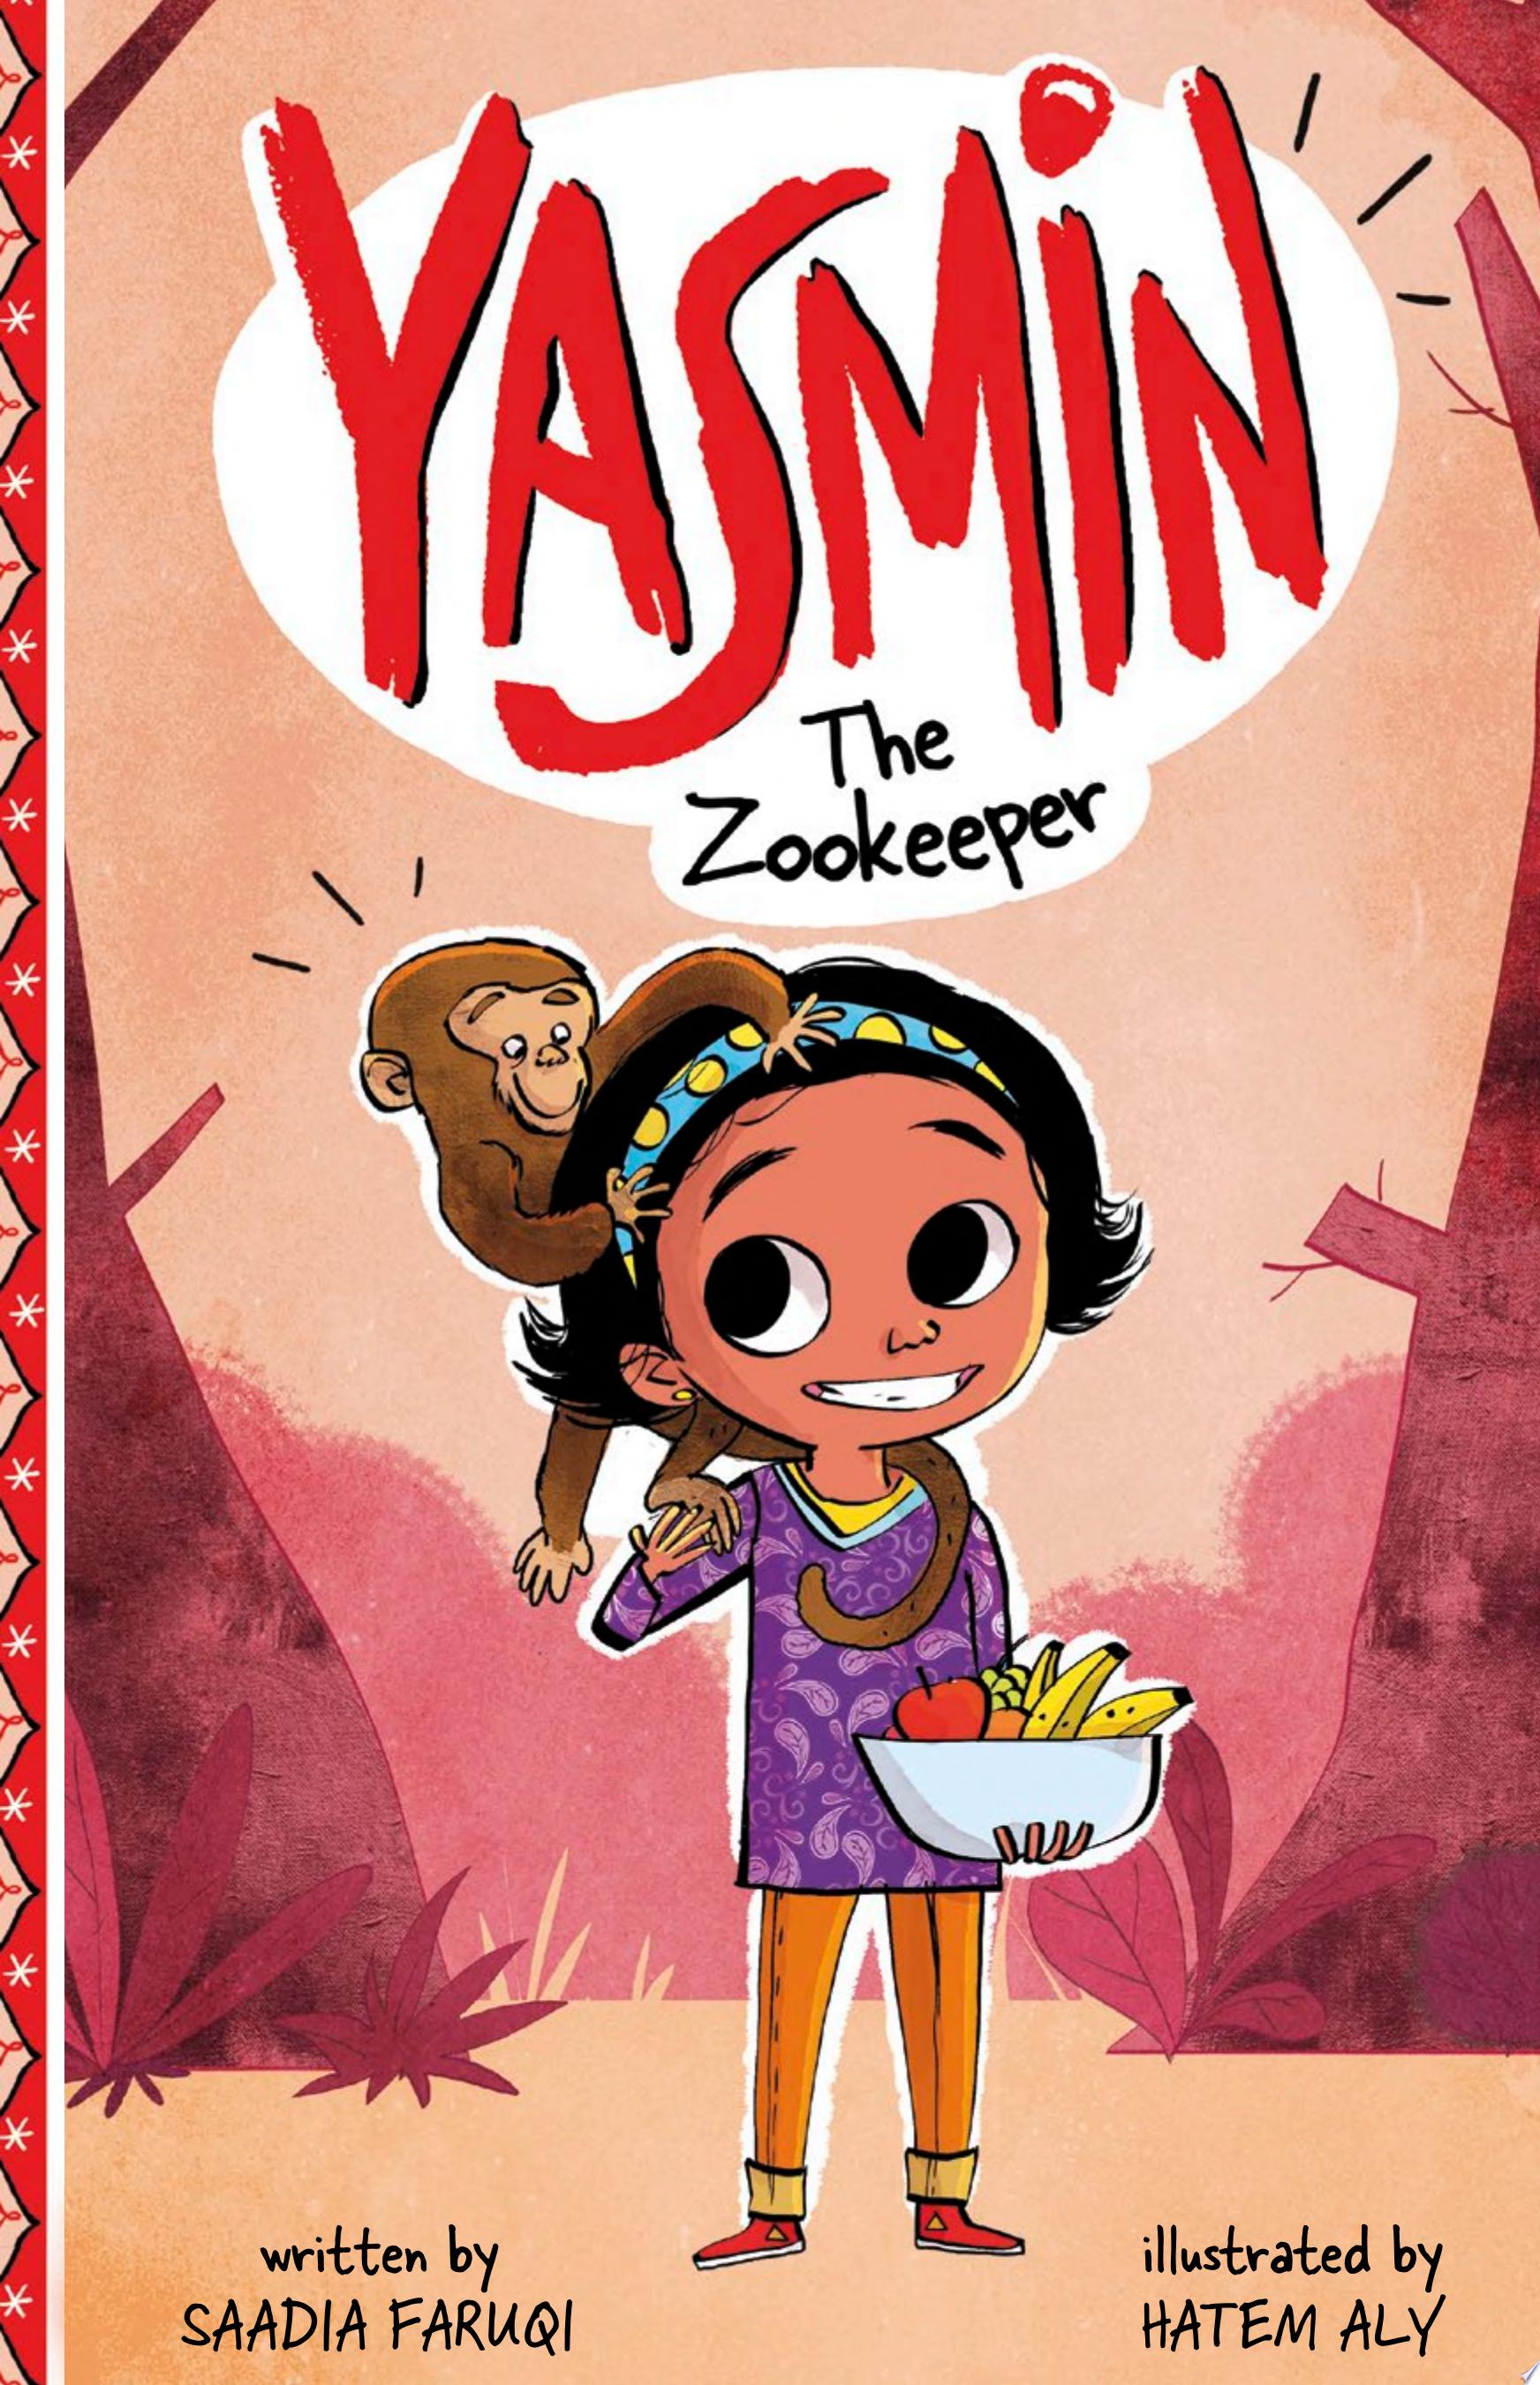 Image for "Yasmin the Zookeeper"